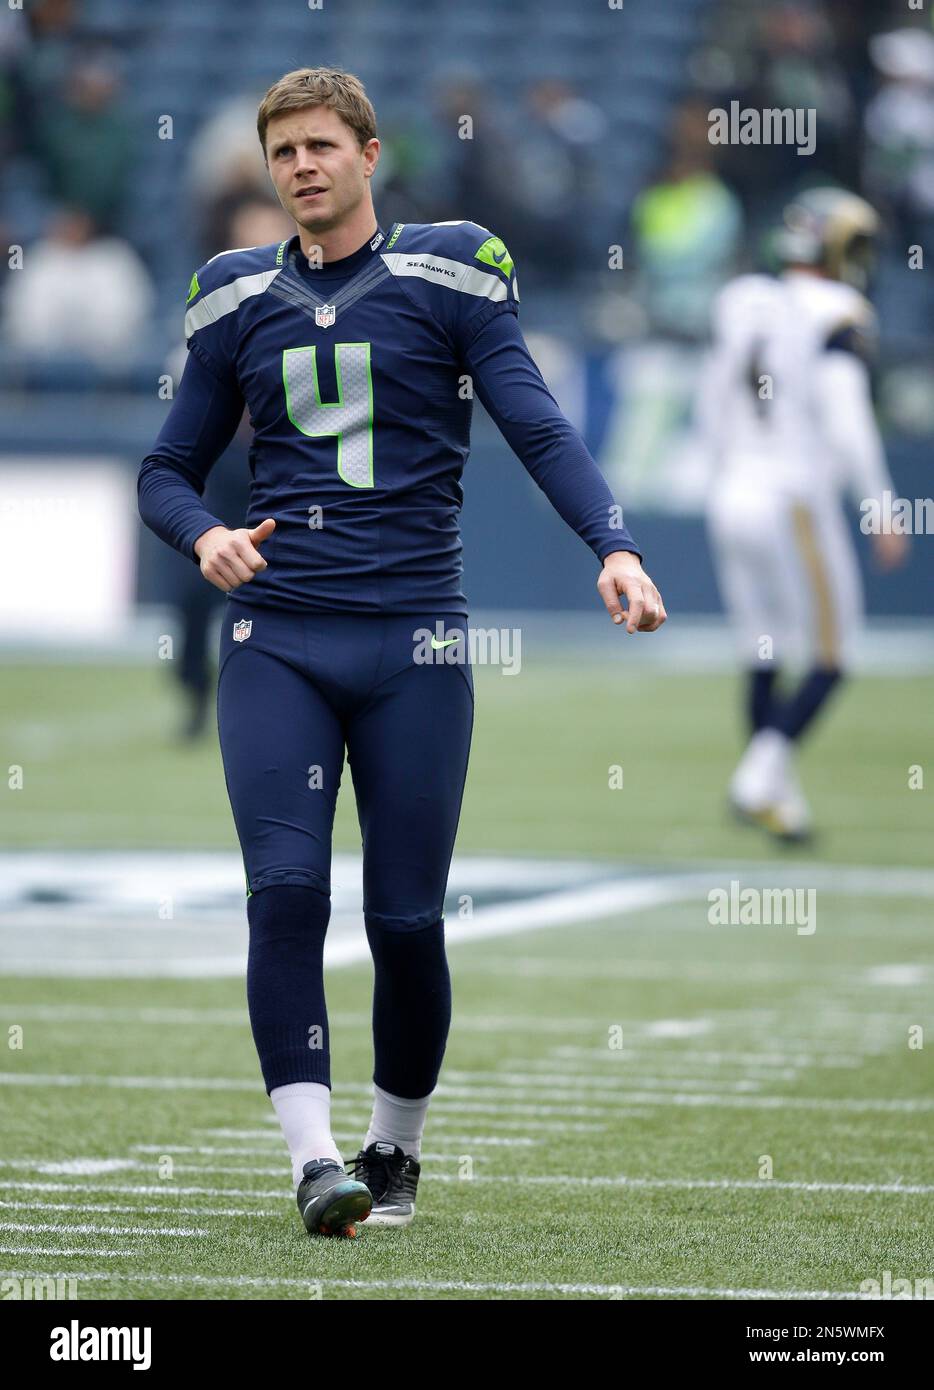 Seattle Seahawks kicker Steven Hauschka warms up before playing the St.  Louis Rams in an NFL football game, Sunday, Dec. 29, 2013, in Seattle. (AP  Photo/Elaine Thompson Stock Photo - Alamy